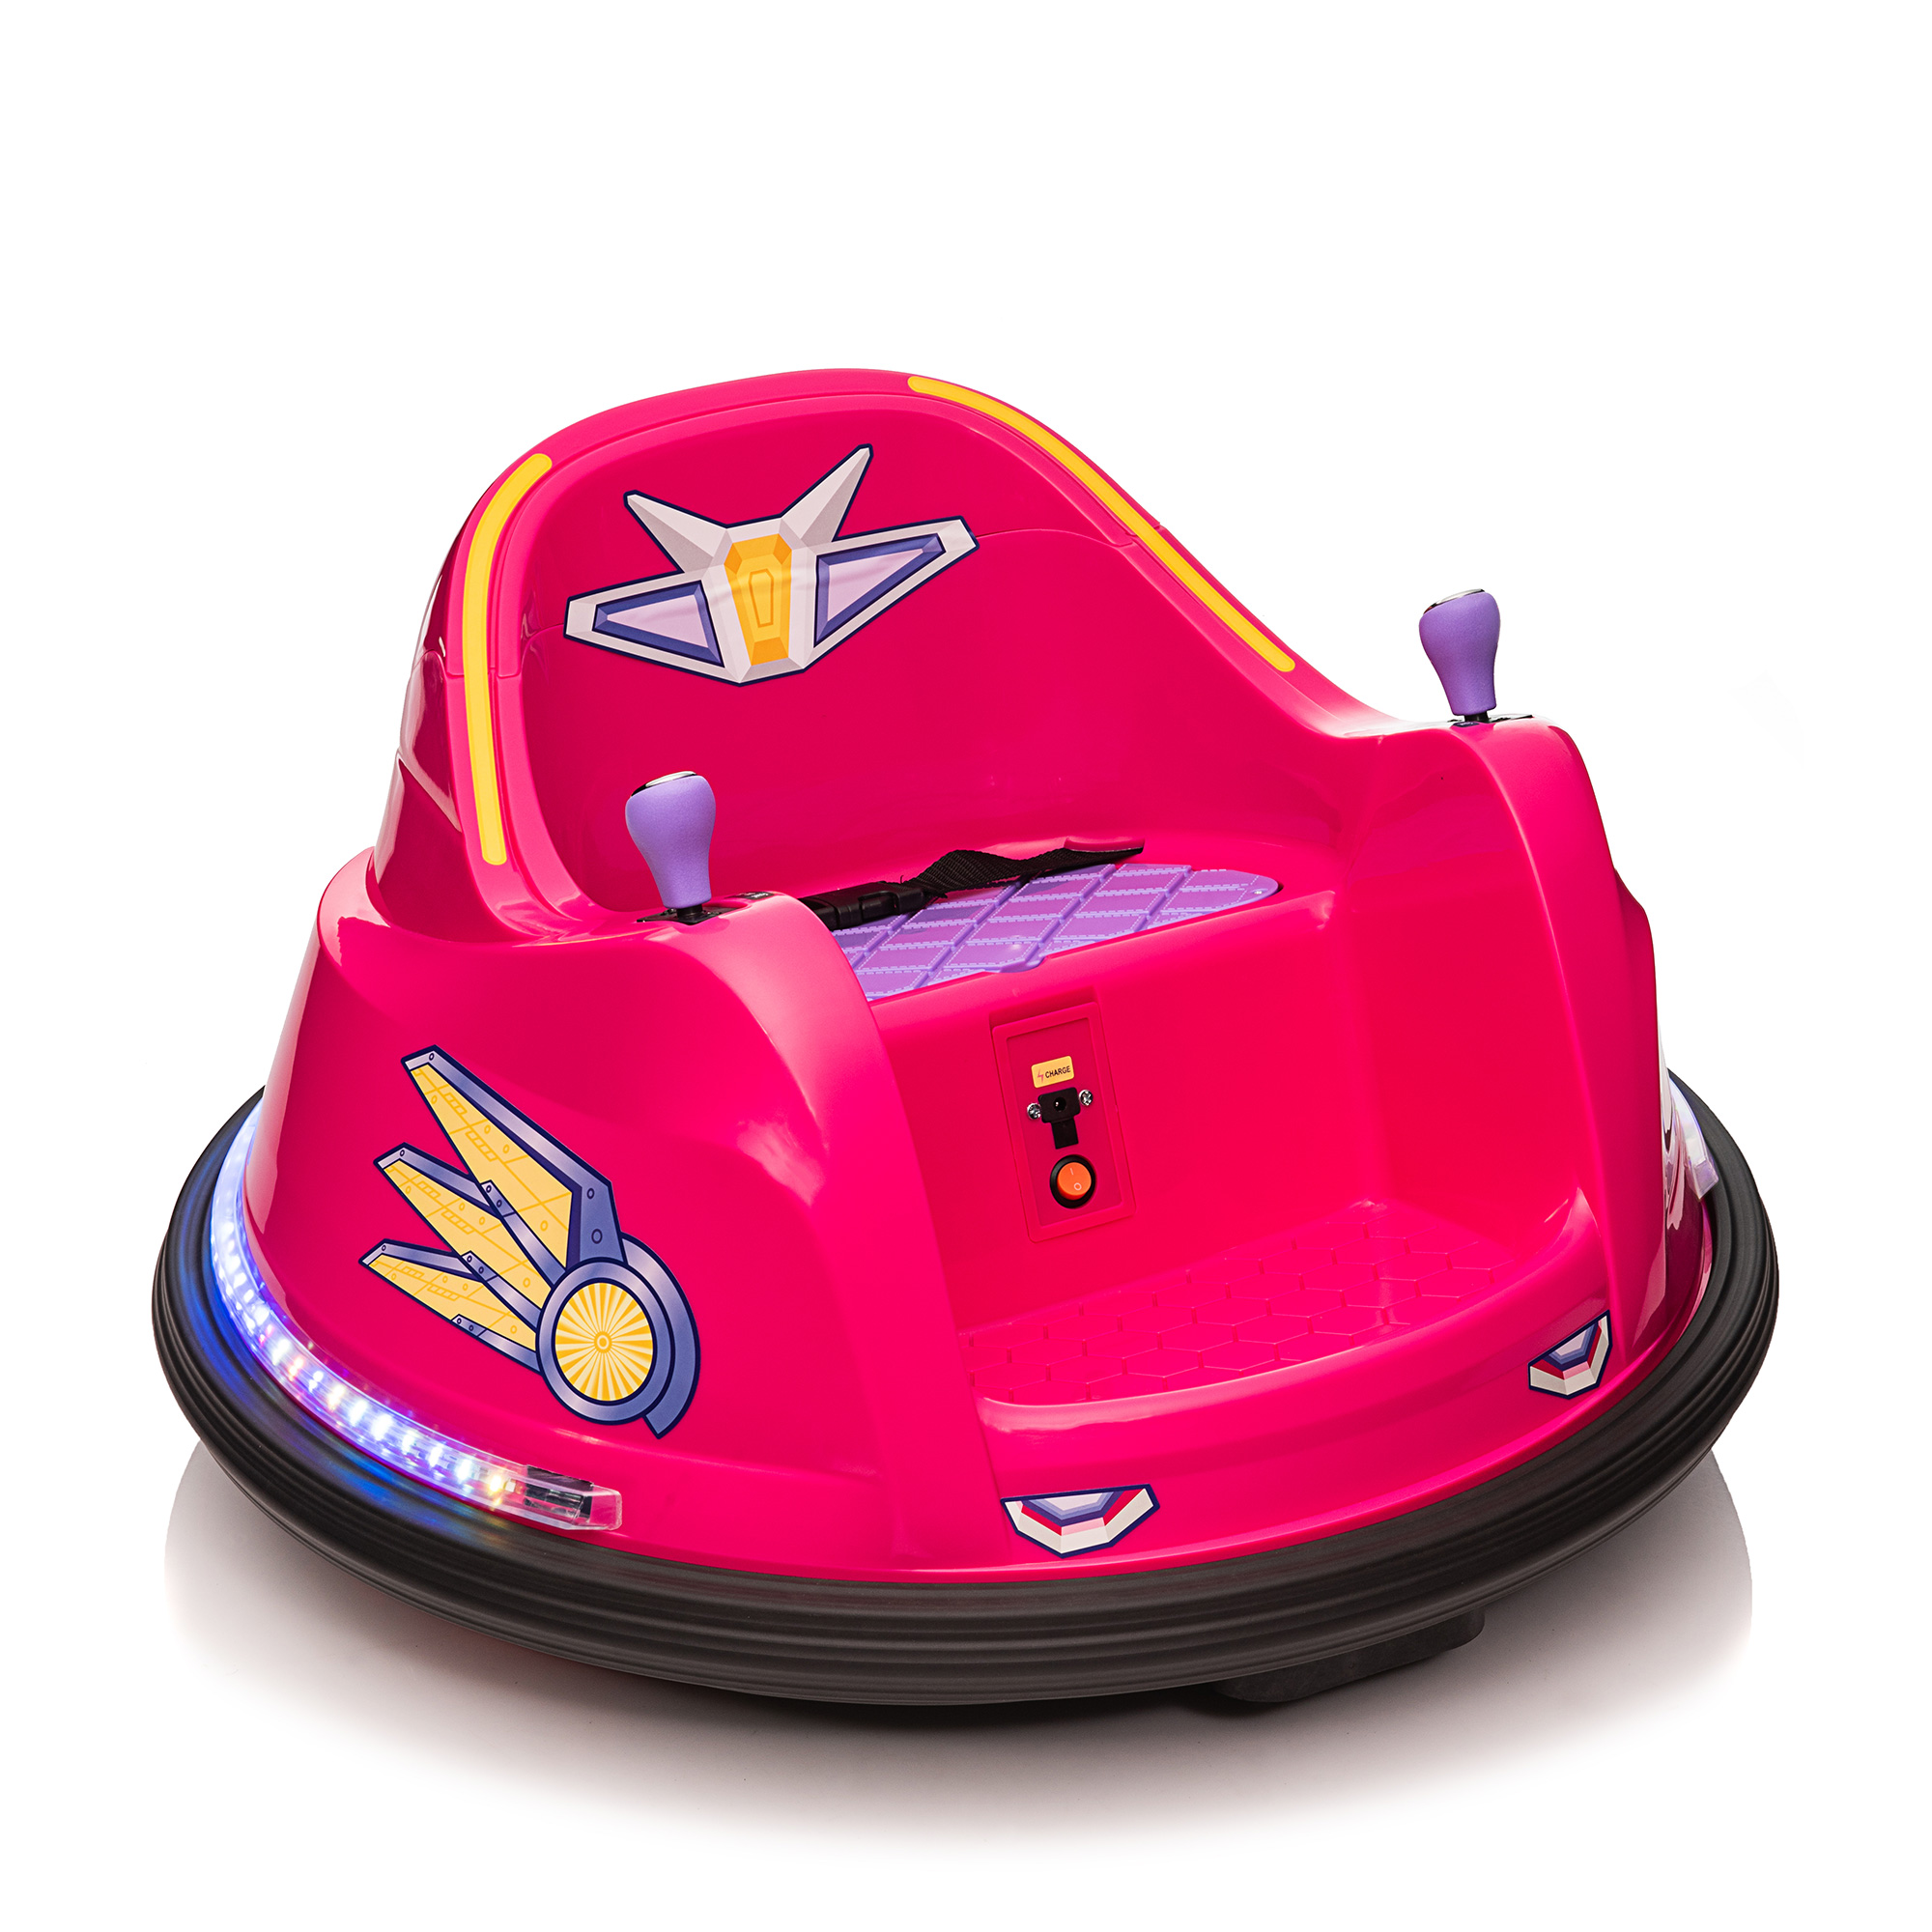 6V Kids Bumper Car, Toddler Ride On Toy, Roller Caster Vehicle with Light Strip, ASTM-Certified for 3 to 8 Years Old - Rosy Red + Purple-CASAINC